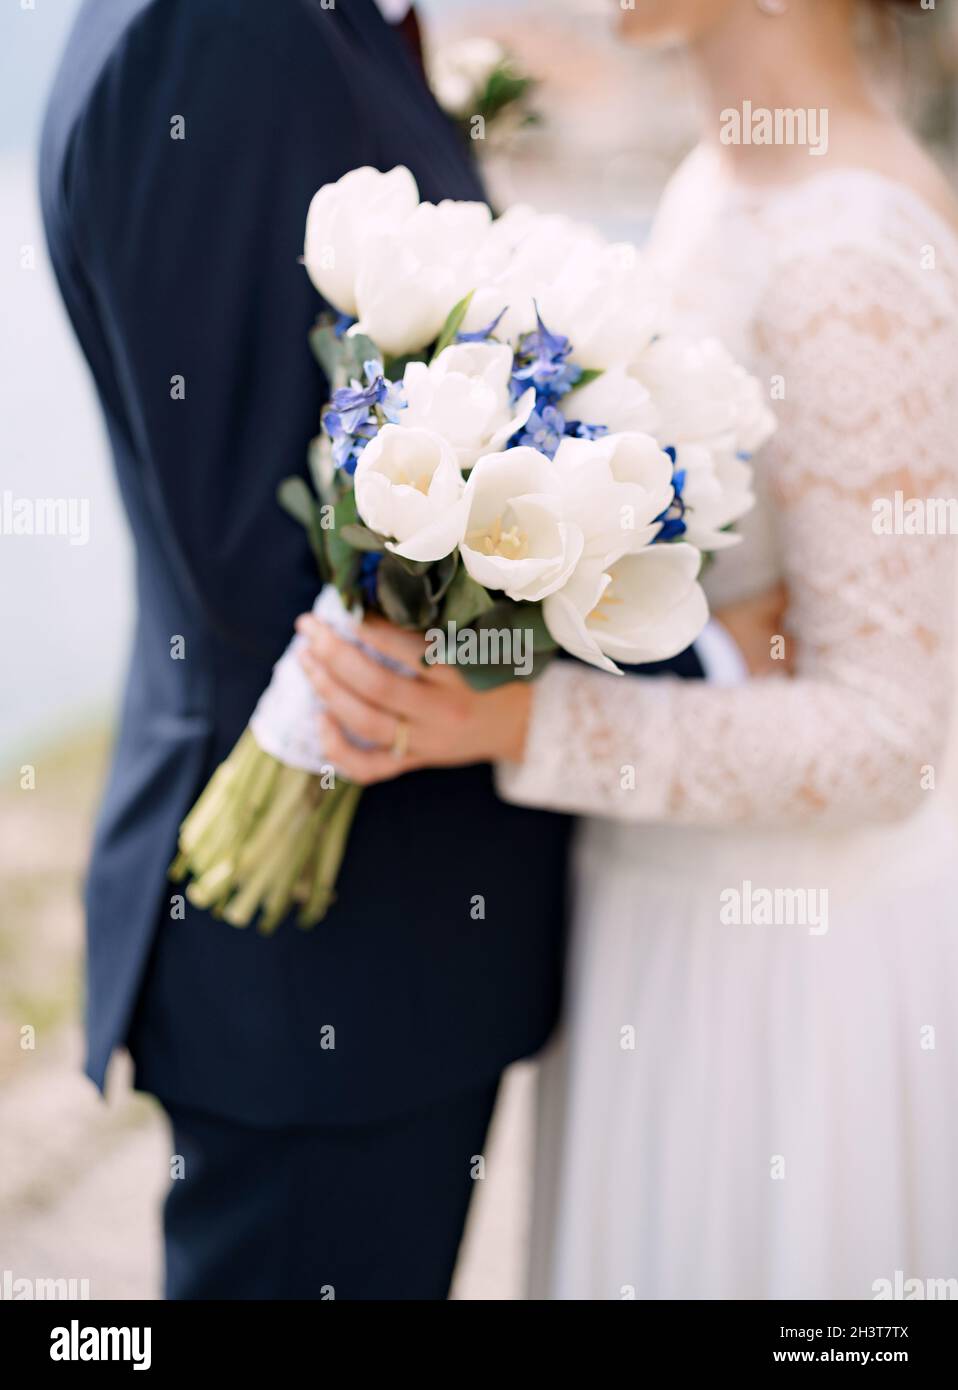 The bride and groom stand hugging and hold a wedding bouquet with white and blue flowers and eucalyptus branches close-up Stock Photo